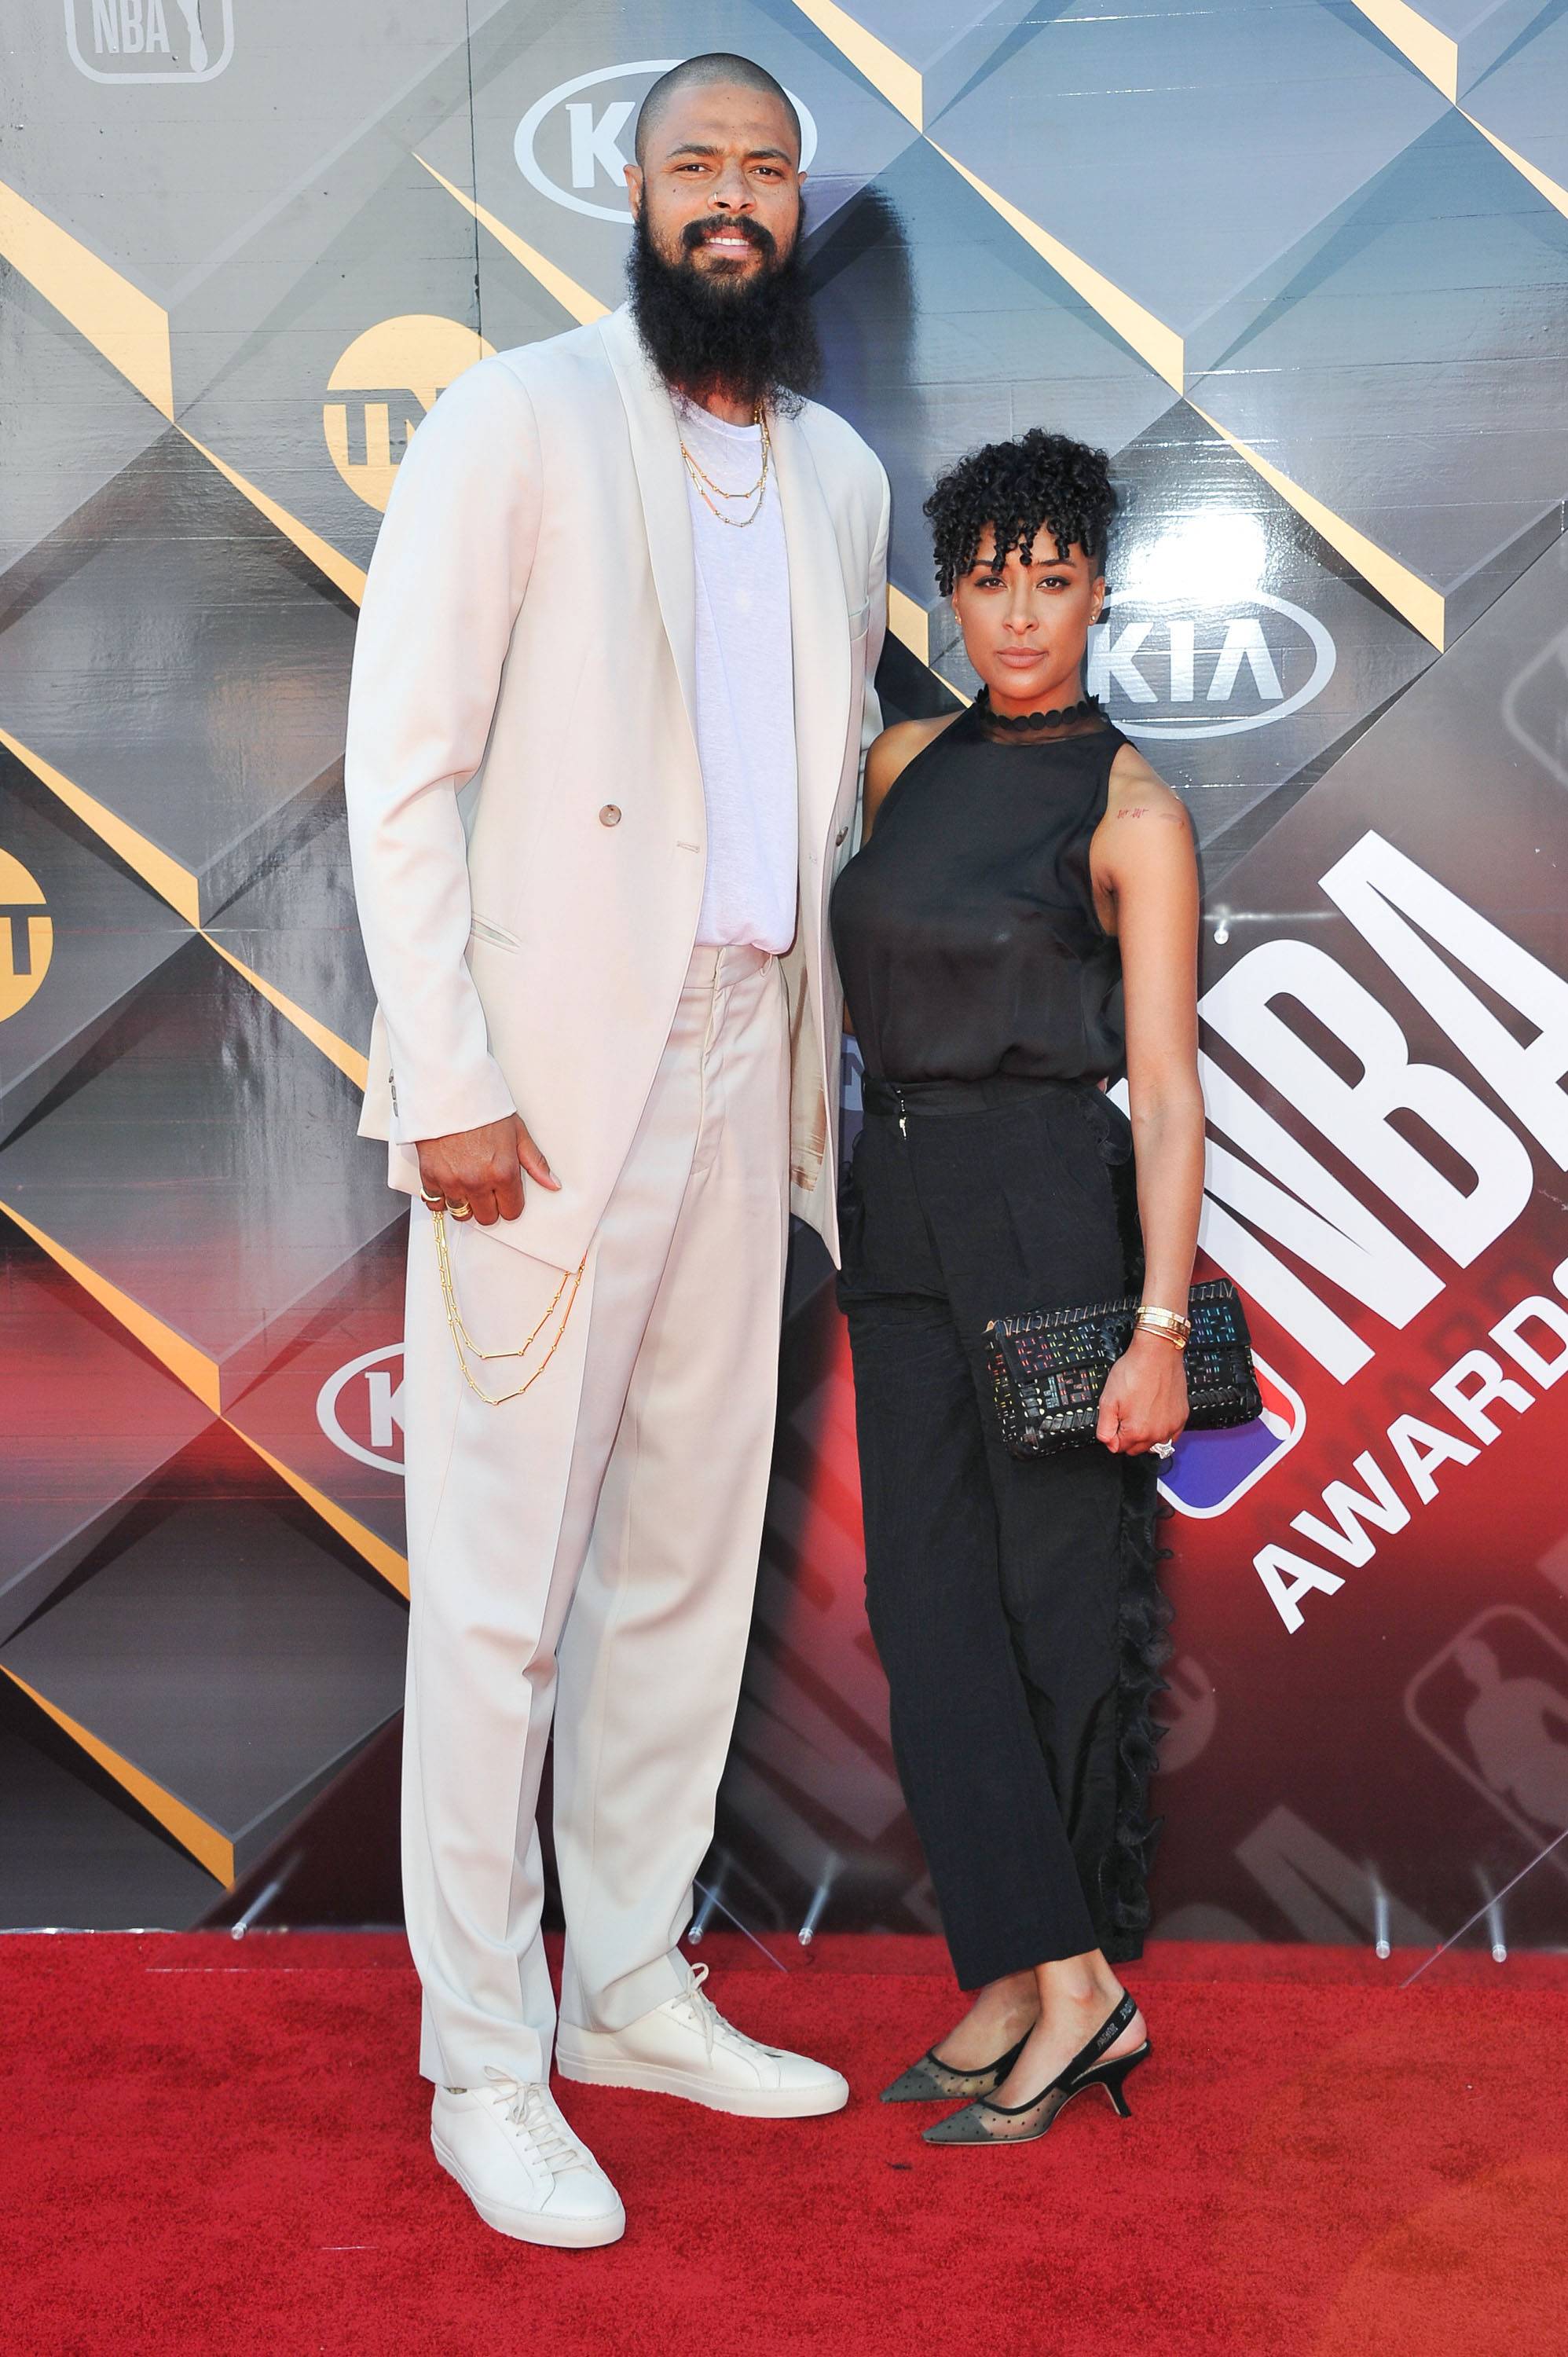 NBA star Tyson Chandler's wife files for divorce after 16 years